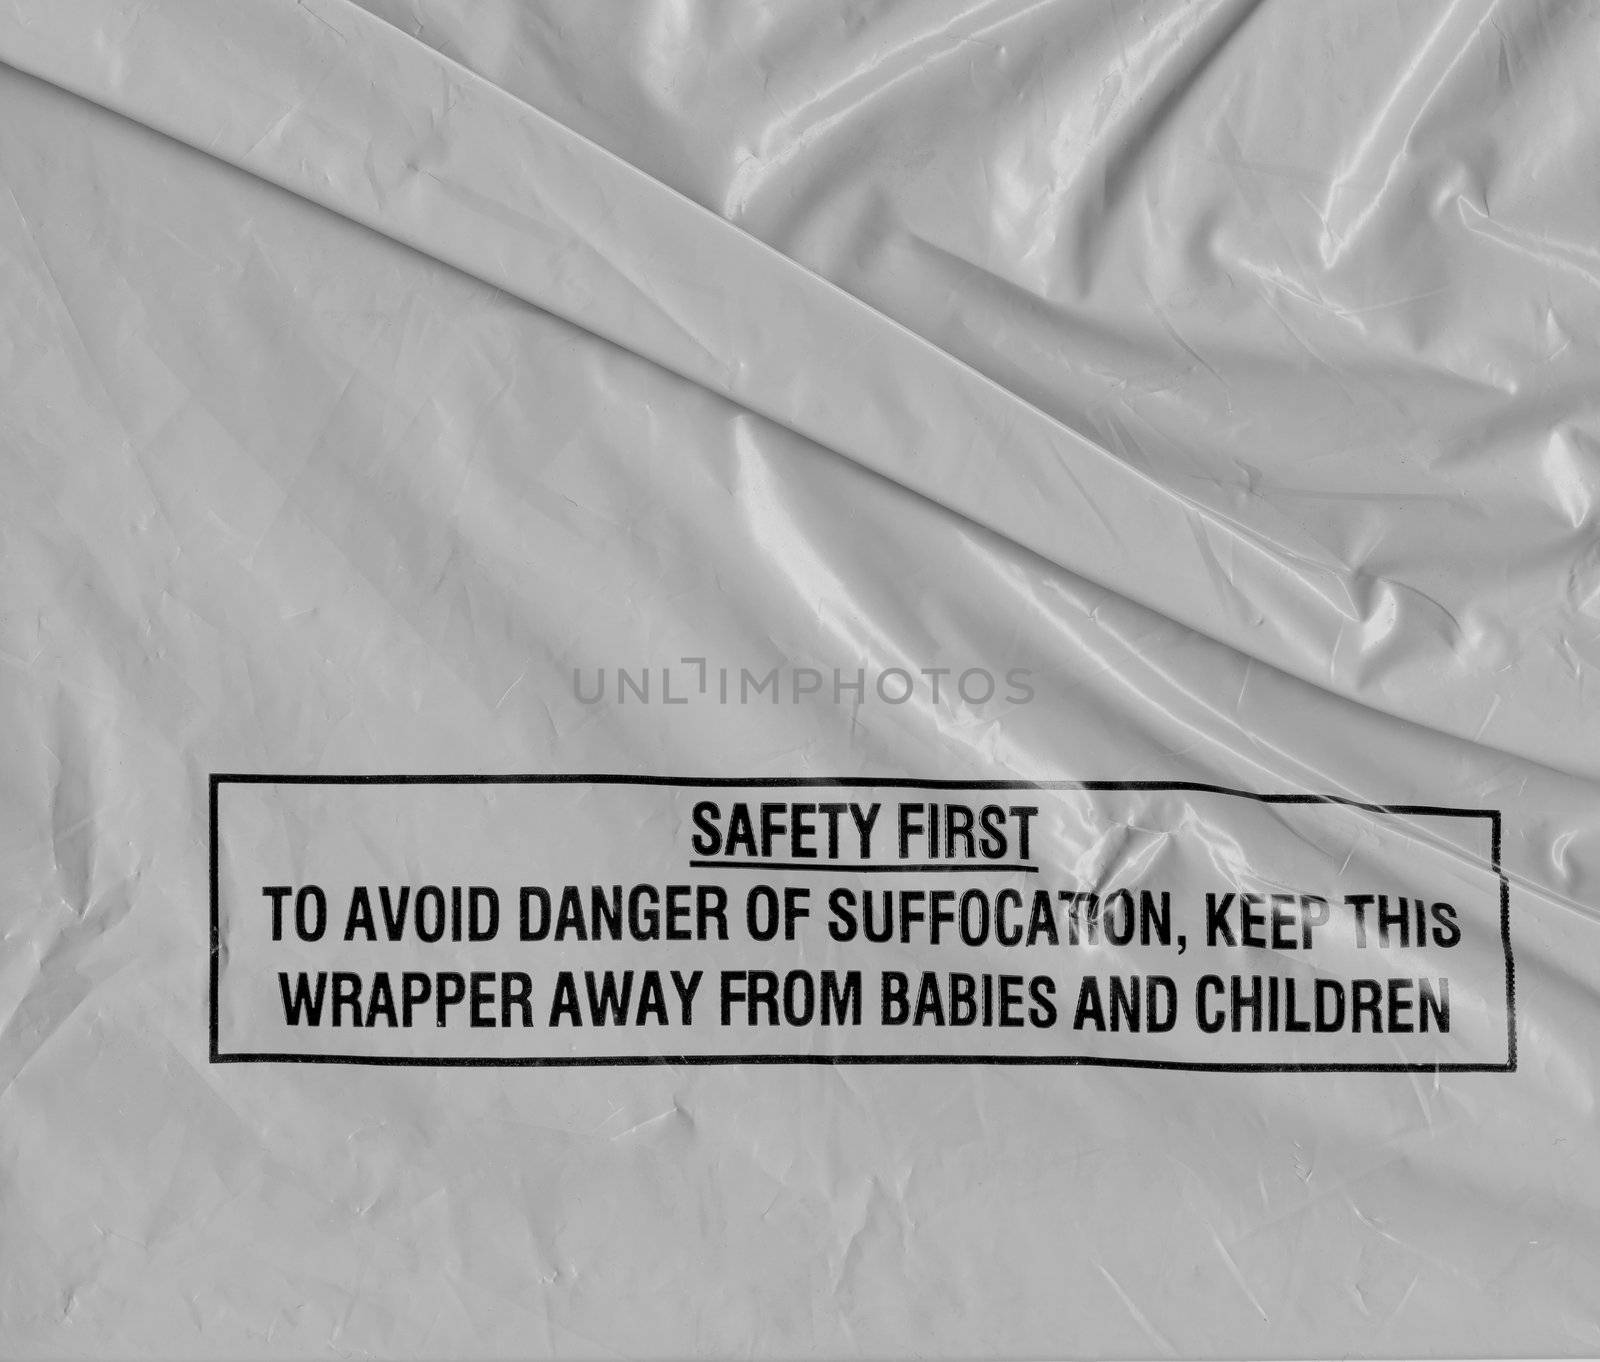 Safety warning on a wrapper